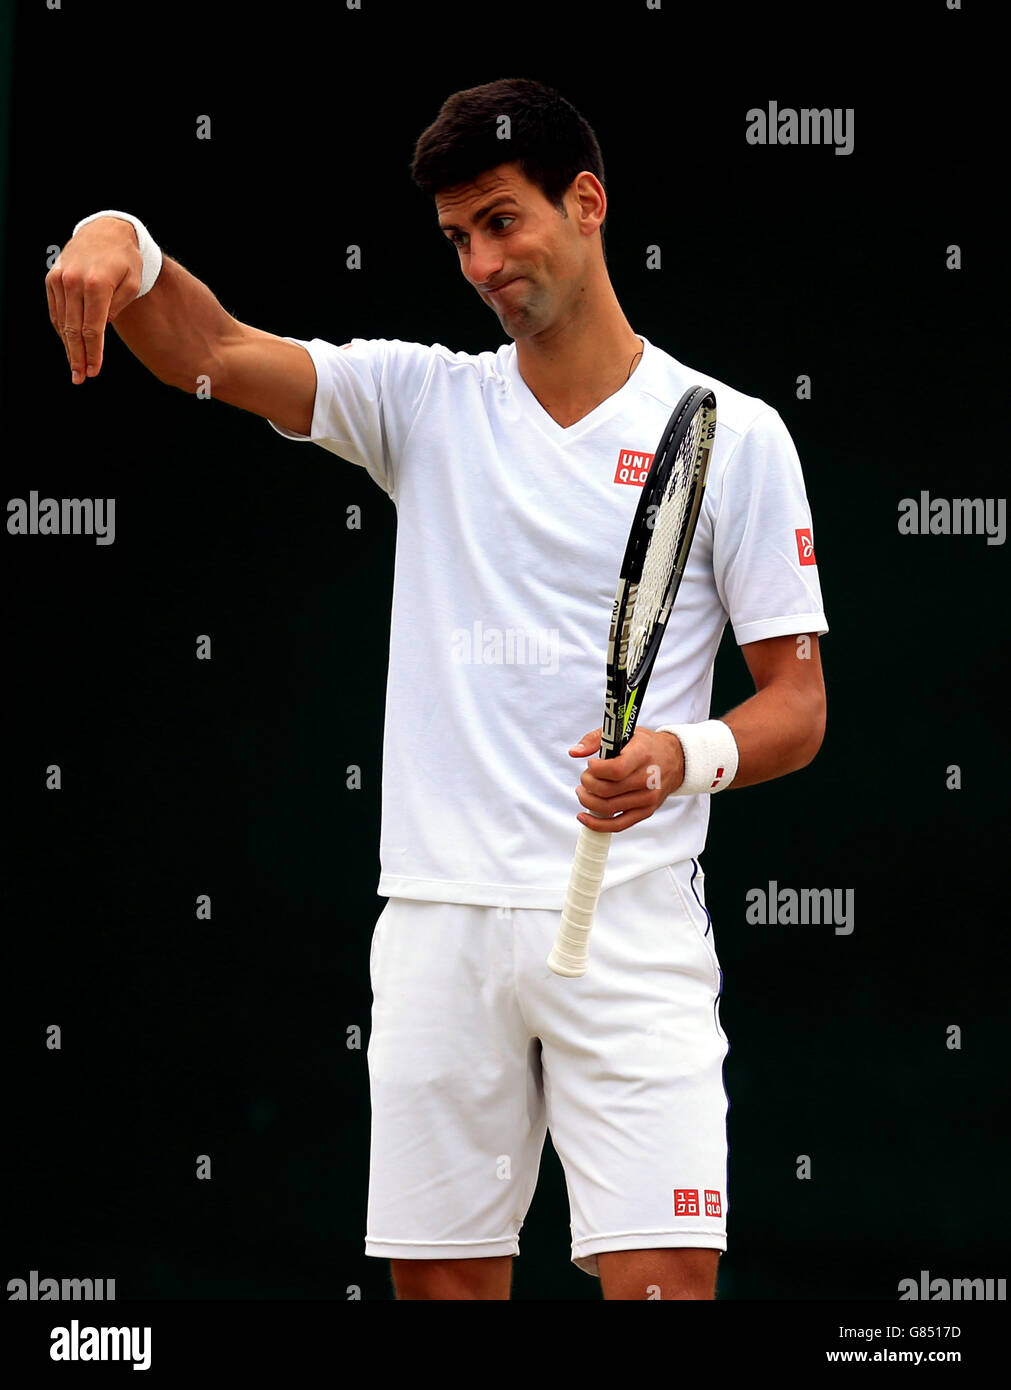 Novak Djokovic during a practice session ahead of the Men's Single's Final on day Thirteen of the Wimbledon Championships at the All England Lawn Tennis and Croquet Club, Wimbledon. Stock Photo